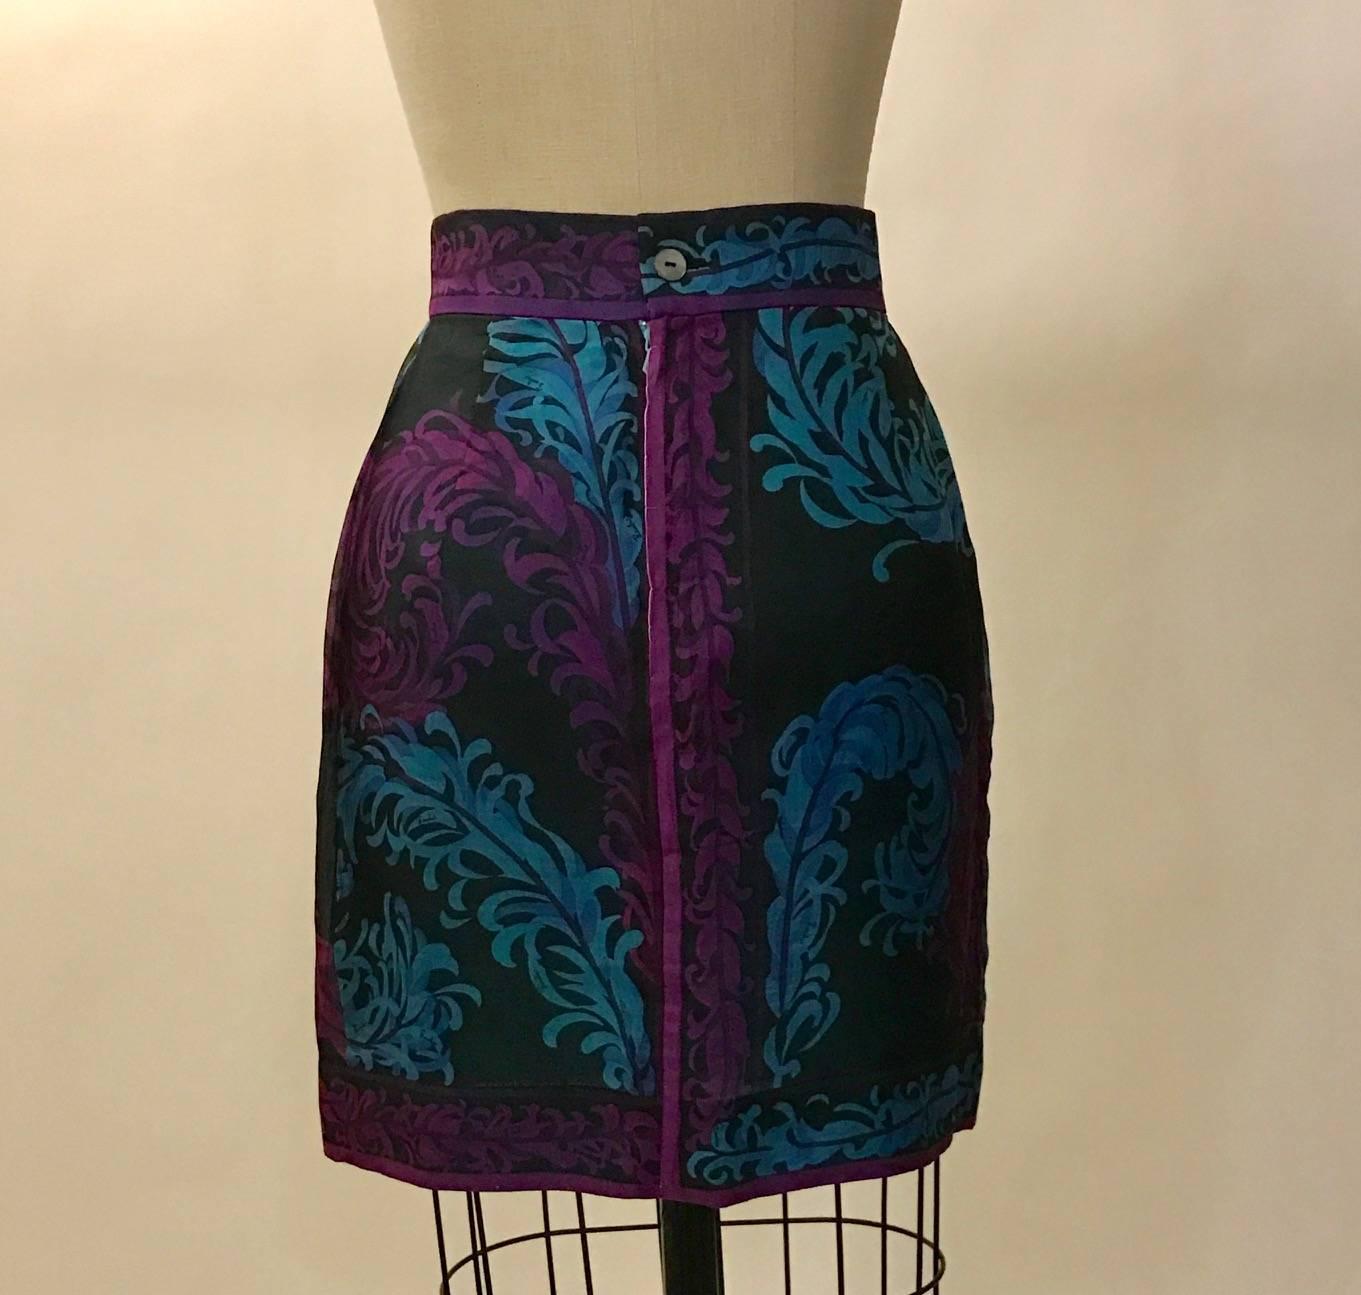 Emilio Pucci black silk skirt with magenta and blue floral print. Signed 'Emilio' throughout. Estimated circa 1990s. Back zip and button. 

100% silk.
Fully lined in 100% rayon.

Made in Italy.

Size IT 40, approximate US 4, but runs small. See